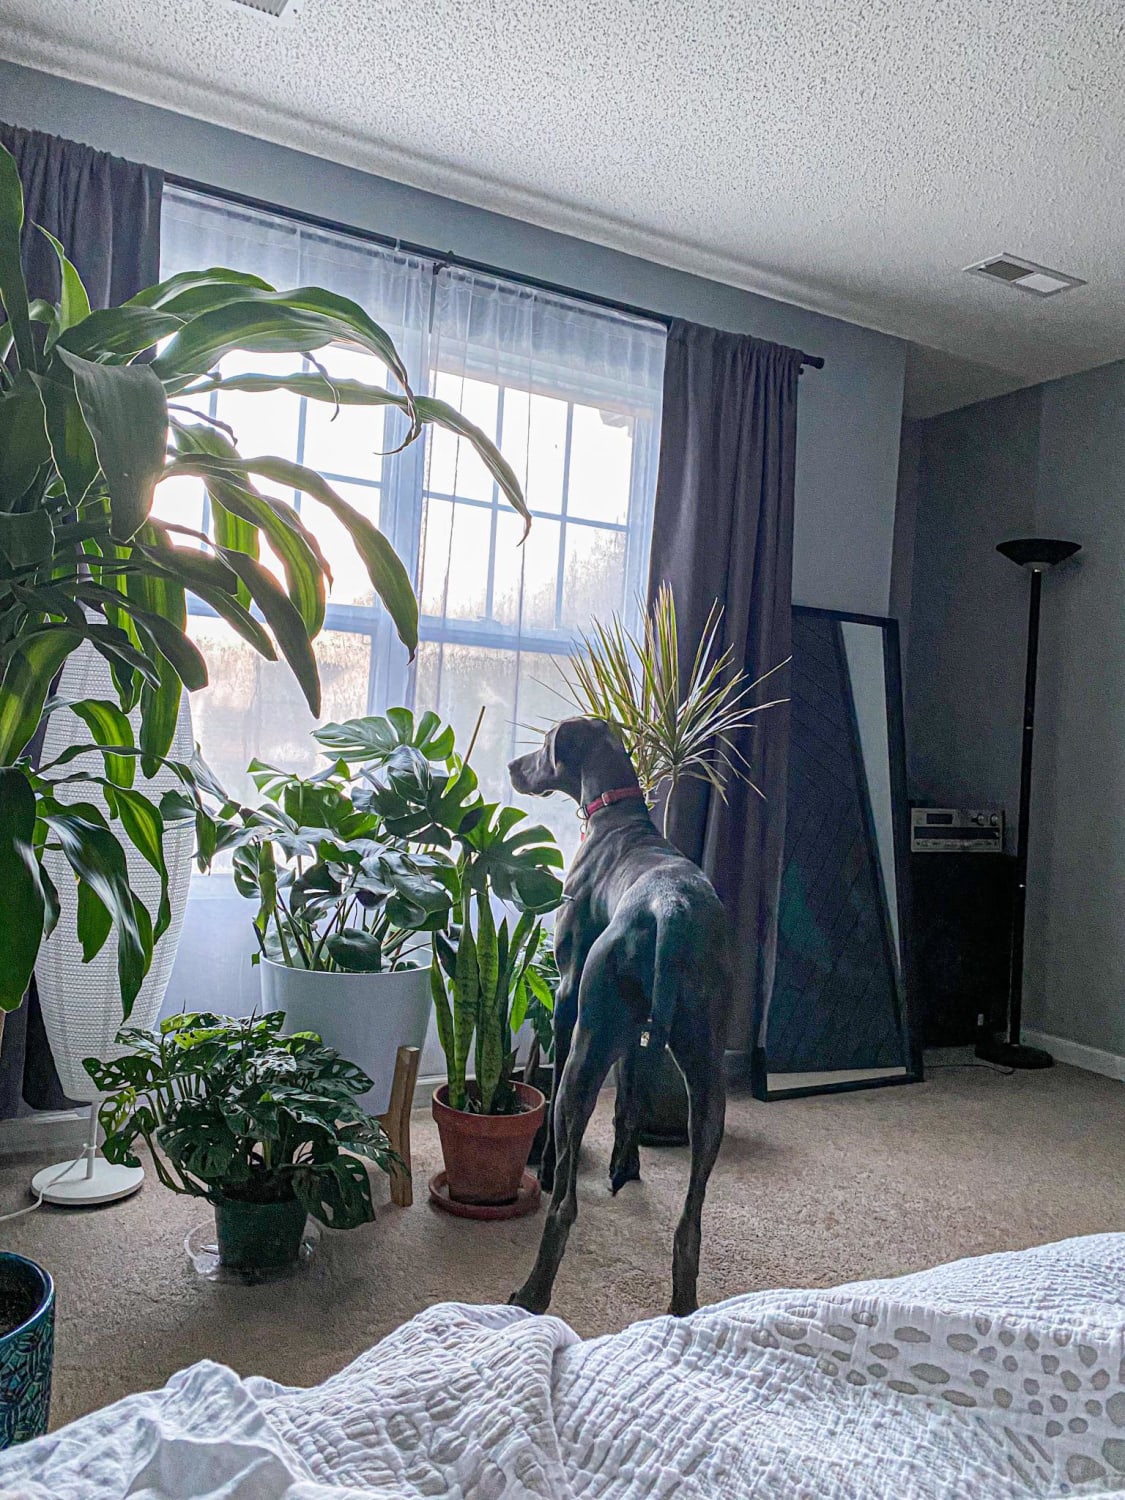 Some of the plants in my master bedroom and my nosey Dane stalking the neighbors